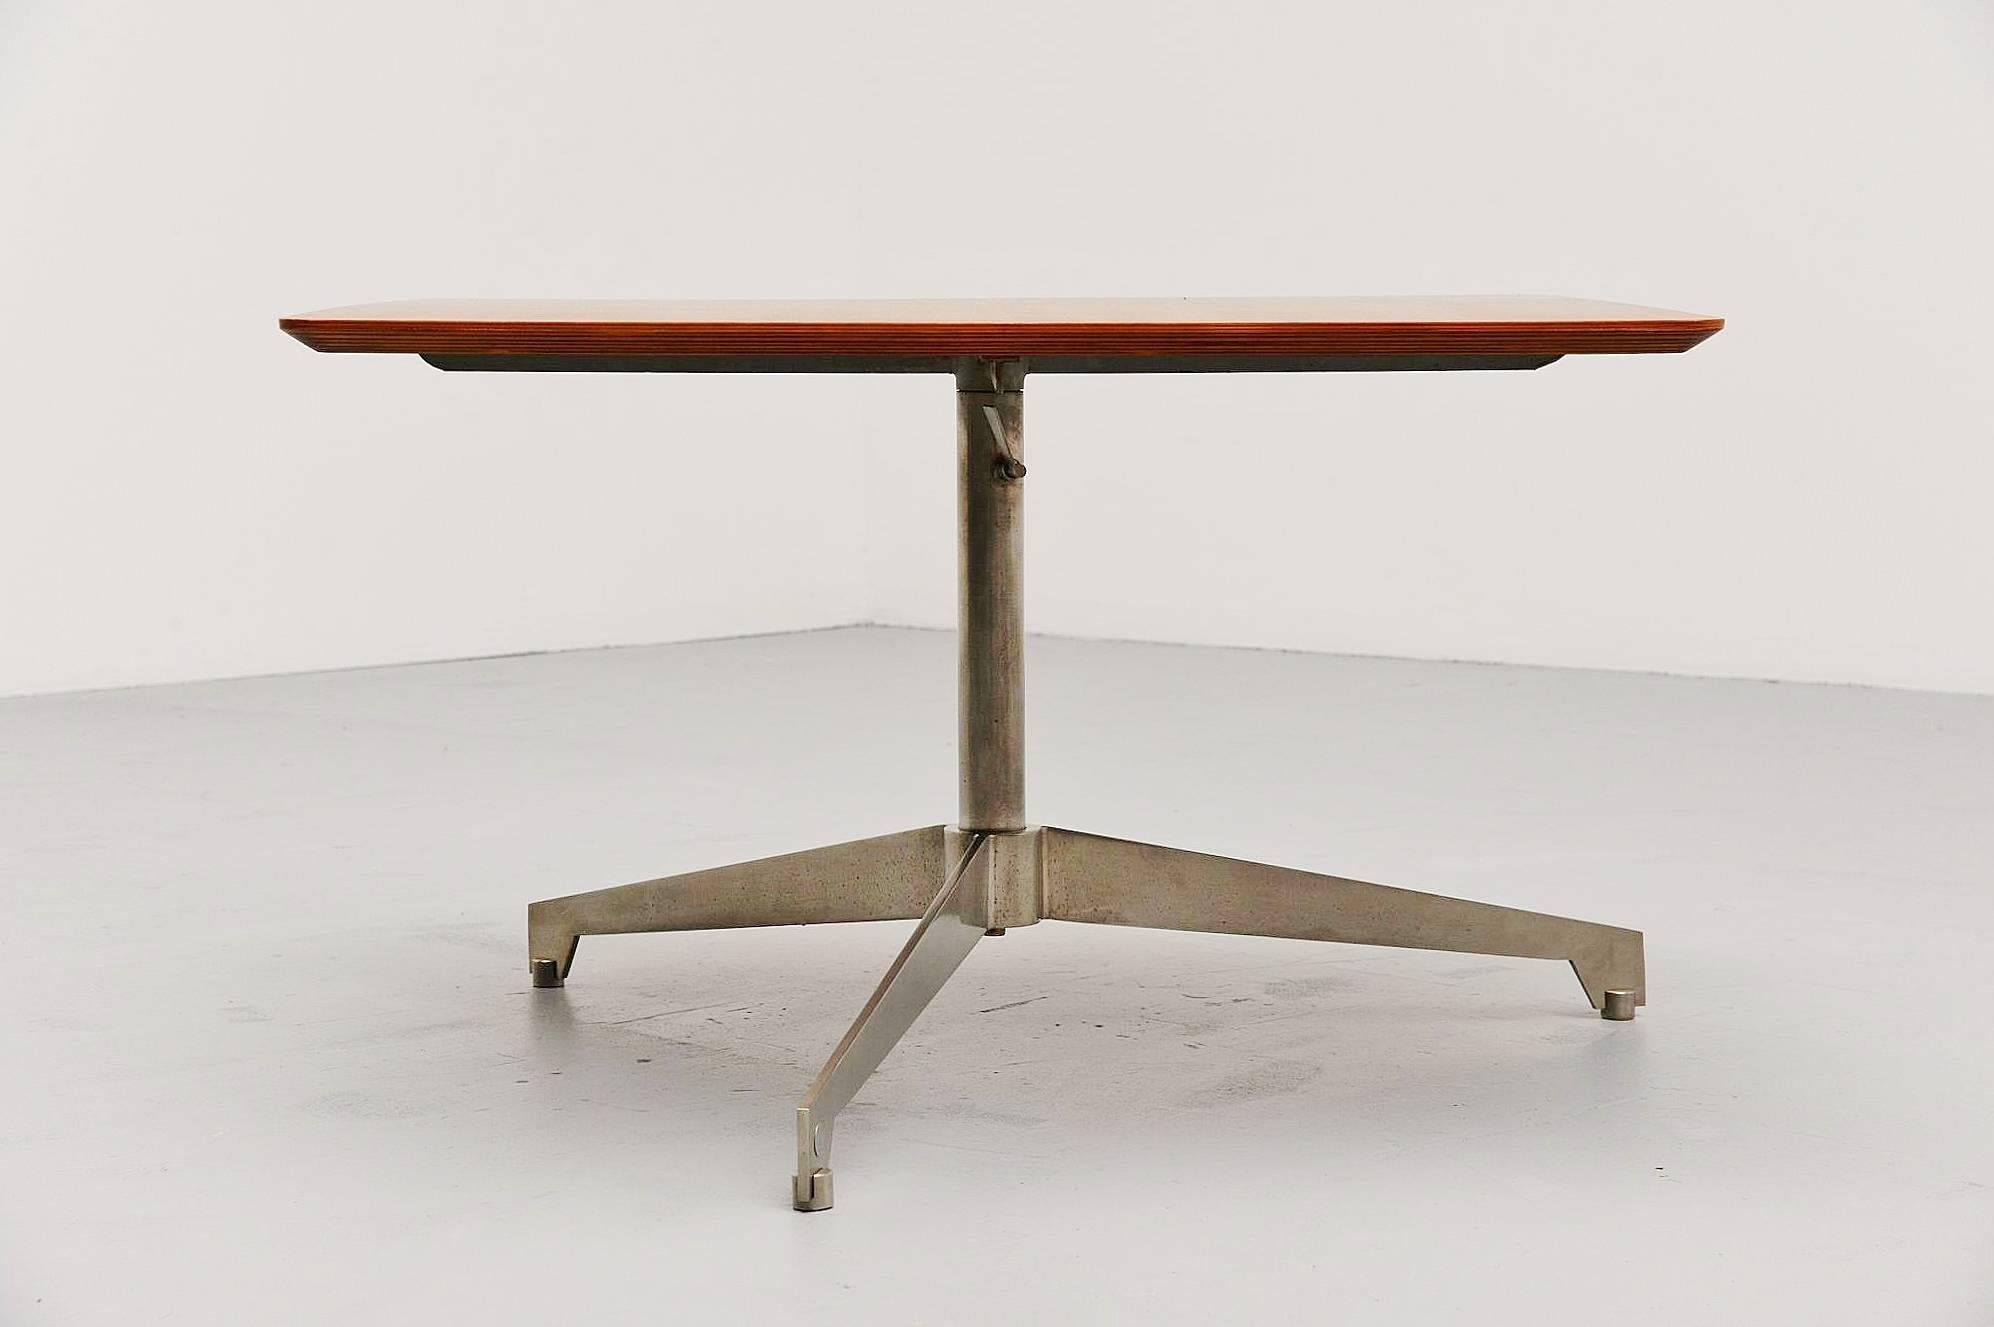 Very nice and unusual adjustable coffee/working table designed by Osvaldo Borsani, manufactured by Tecno, Italy 1960. This table has a chrome-plated metal tripod base which is adjustable in height, from 53 to 73 cm. The top is made of walnut veneer